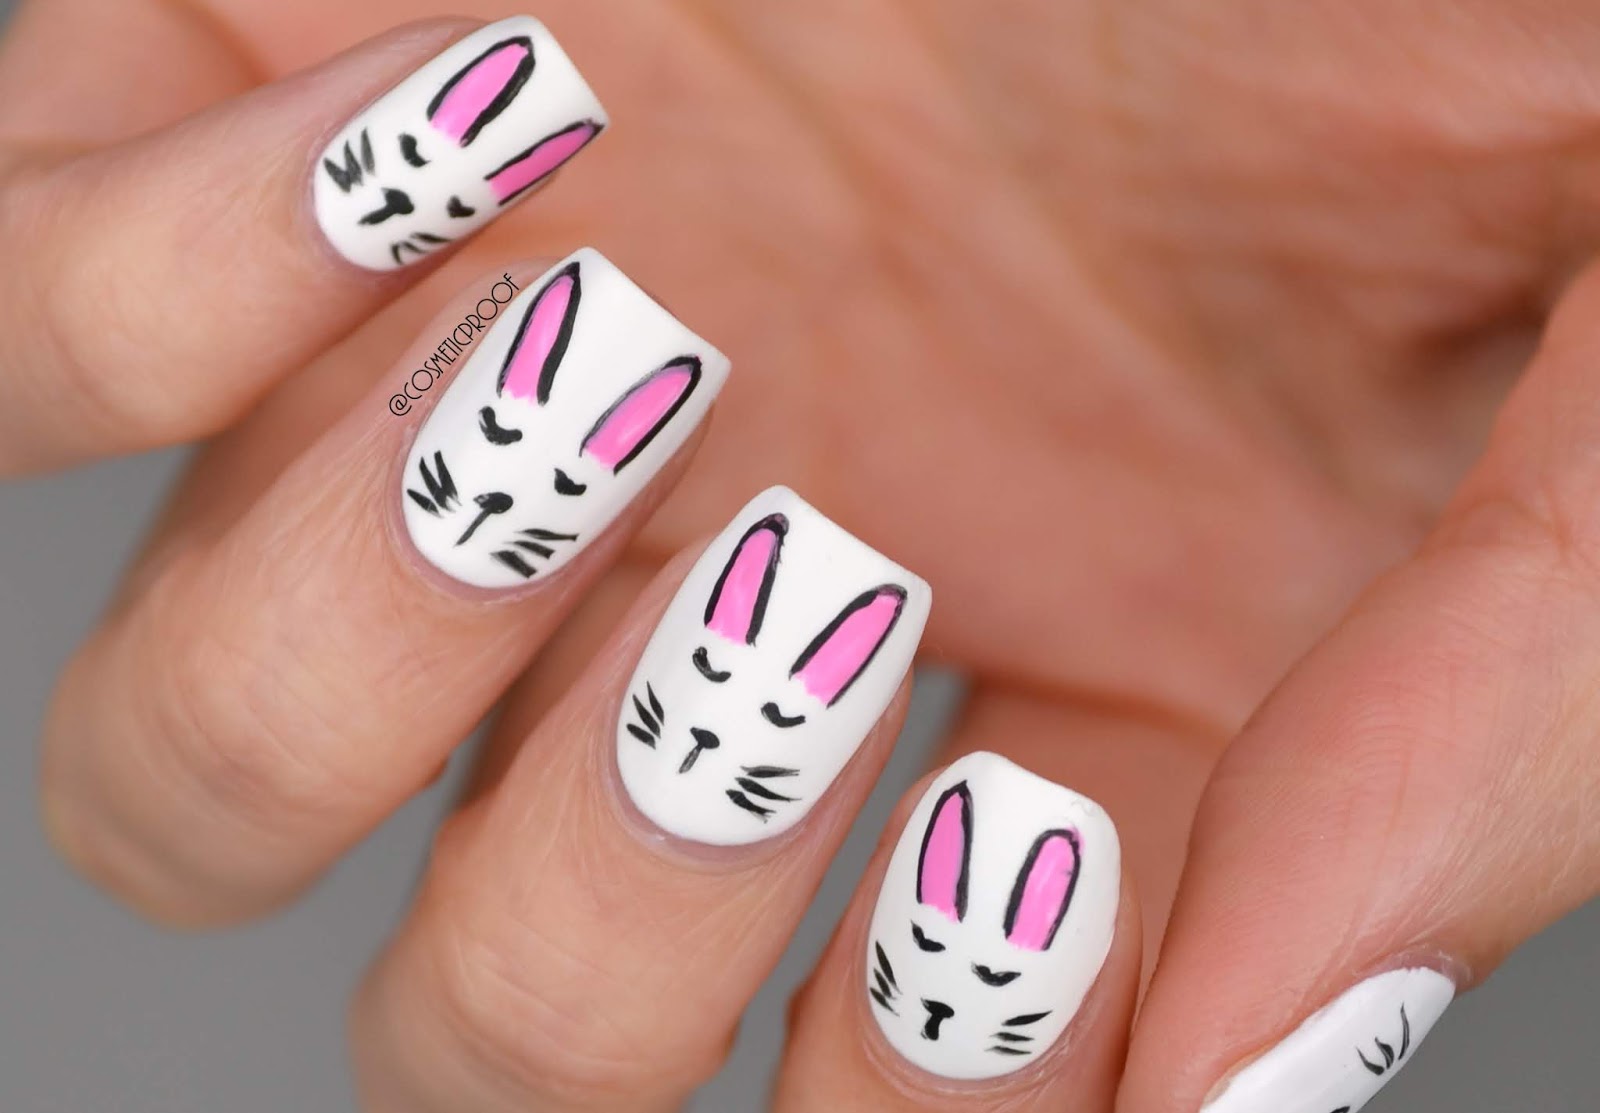 3. Glitter Easter Bunny Nails - wide 4